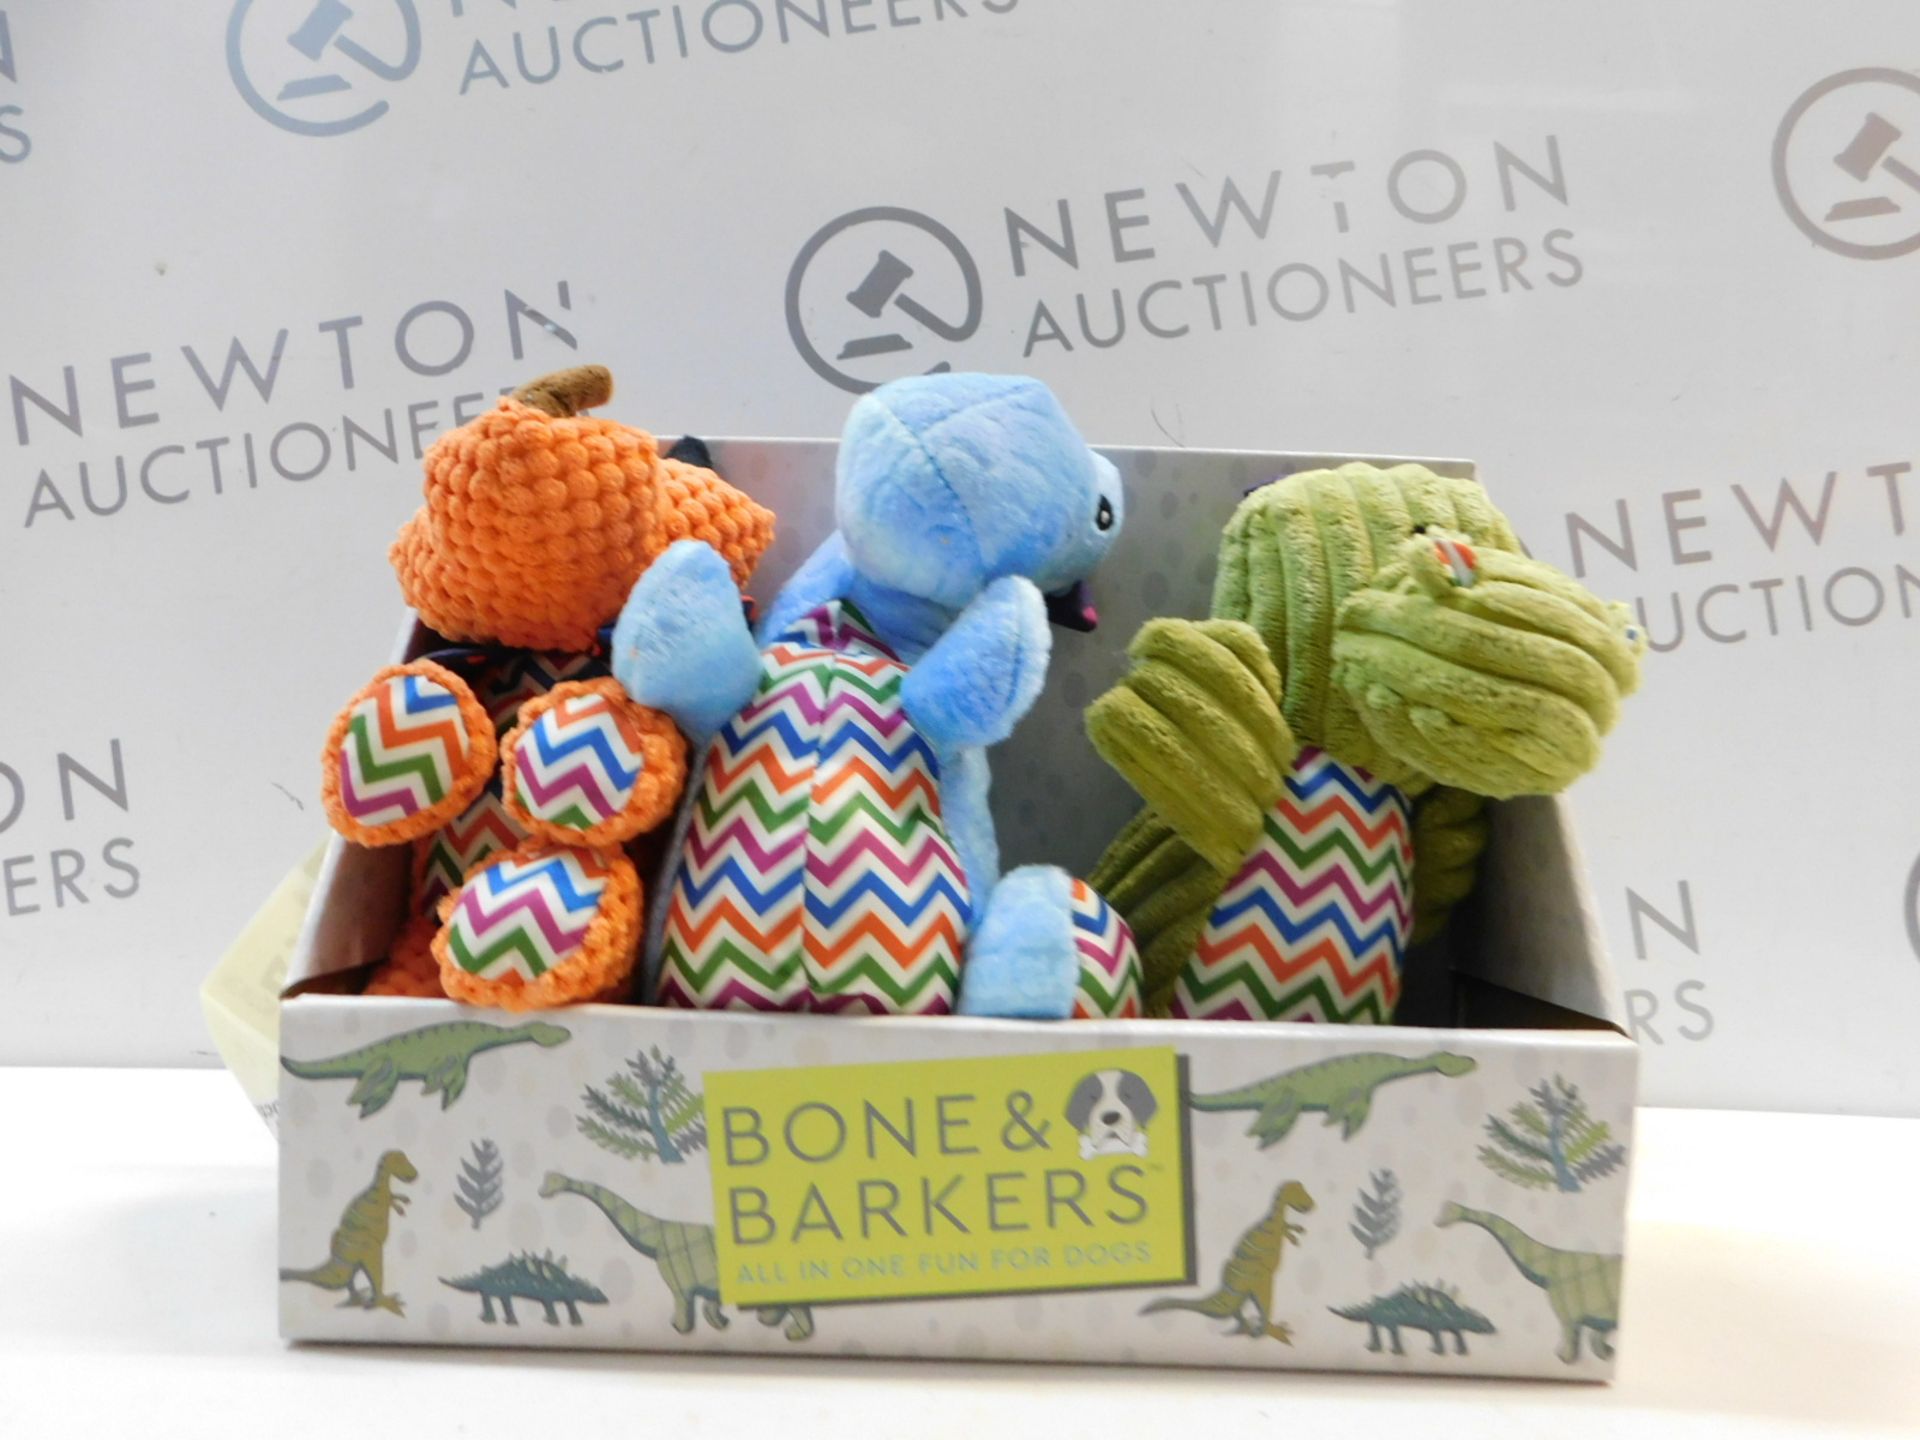 1 PACK OF 3 BONE & BARKERS DOG TOYS RRP Â£24.99